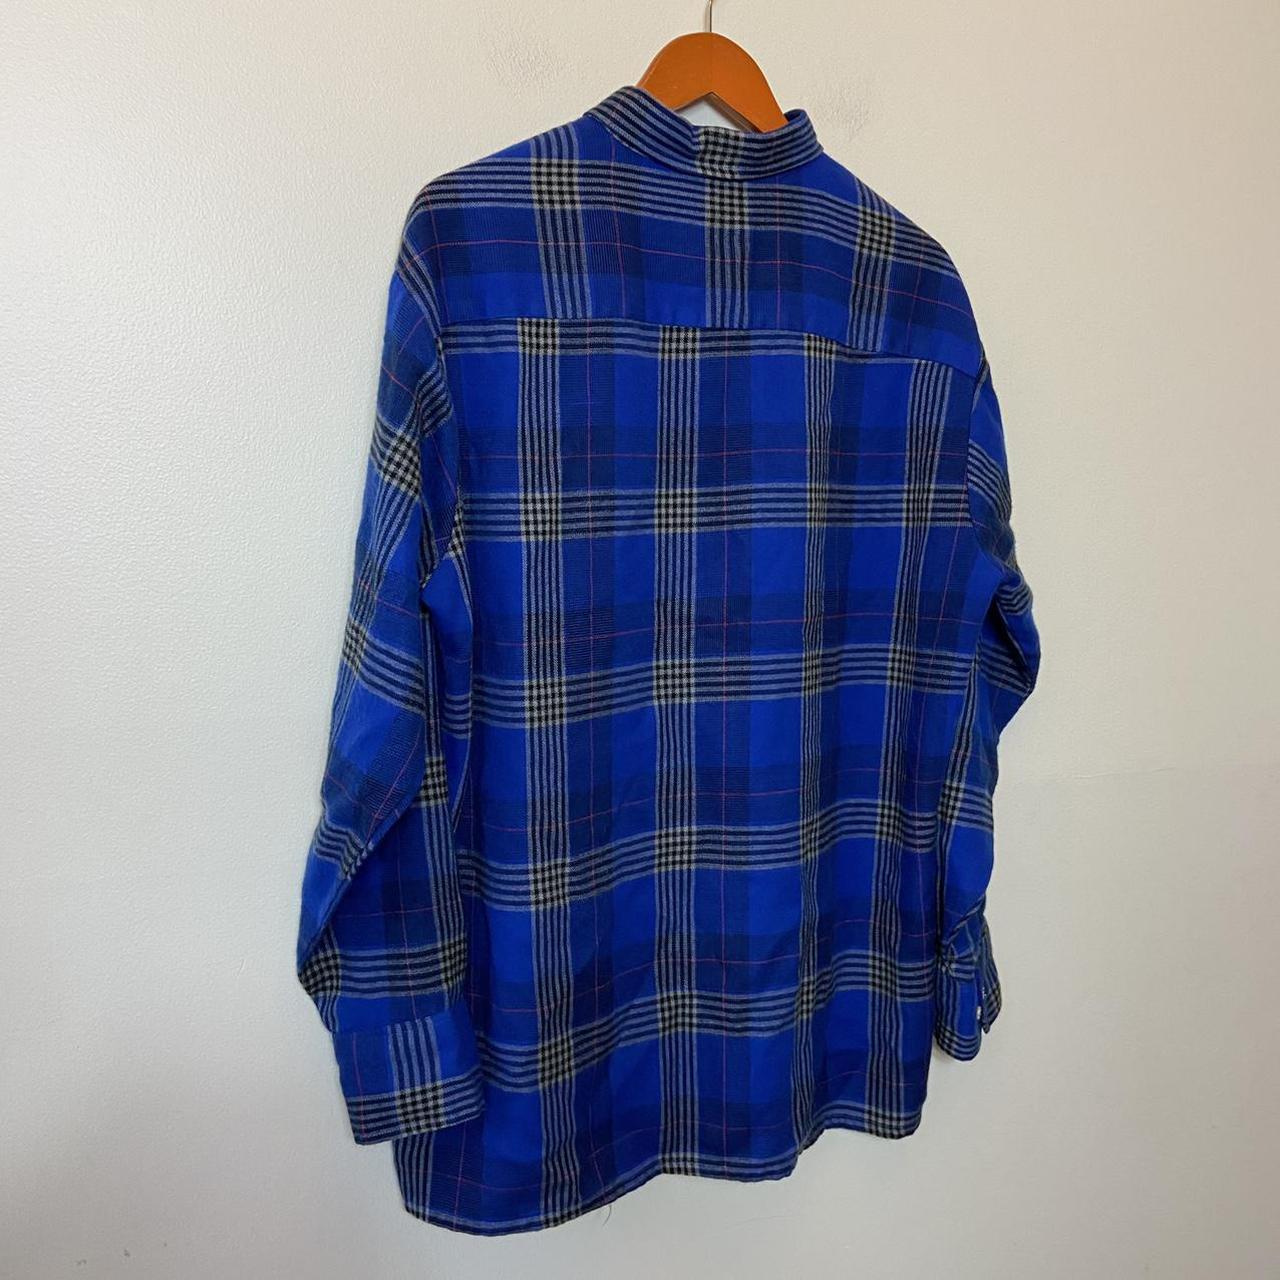 Product Image 4 - VINTAGE 1980s 1990s FLANNEL SHIRT